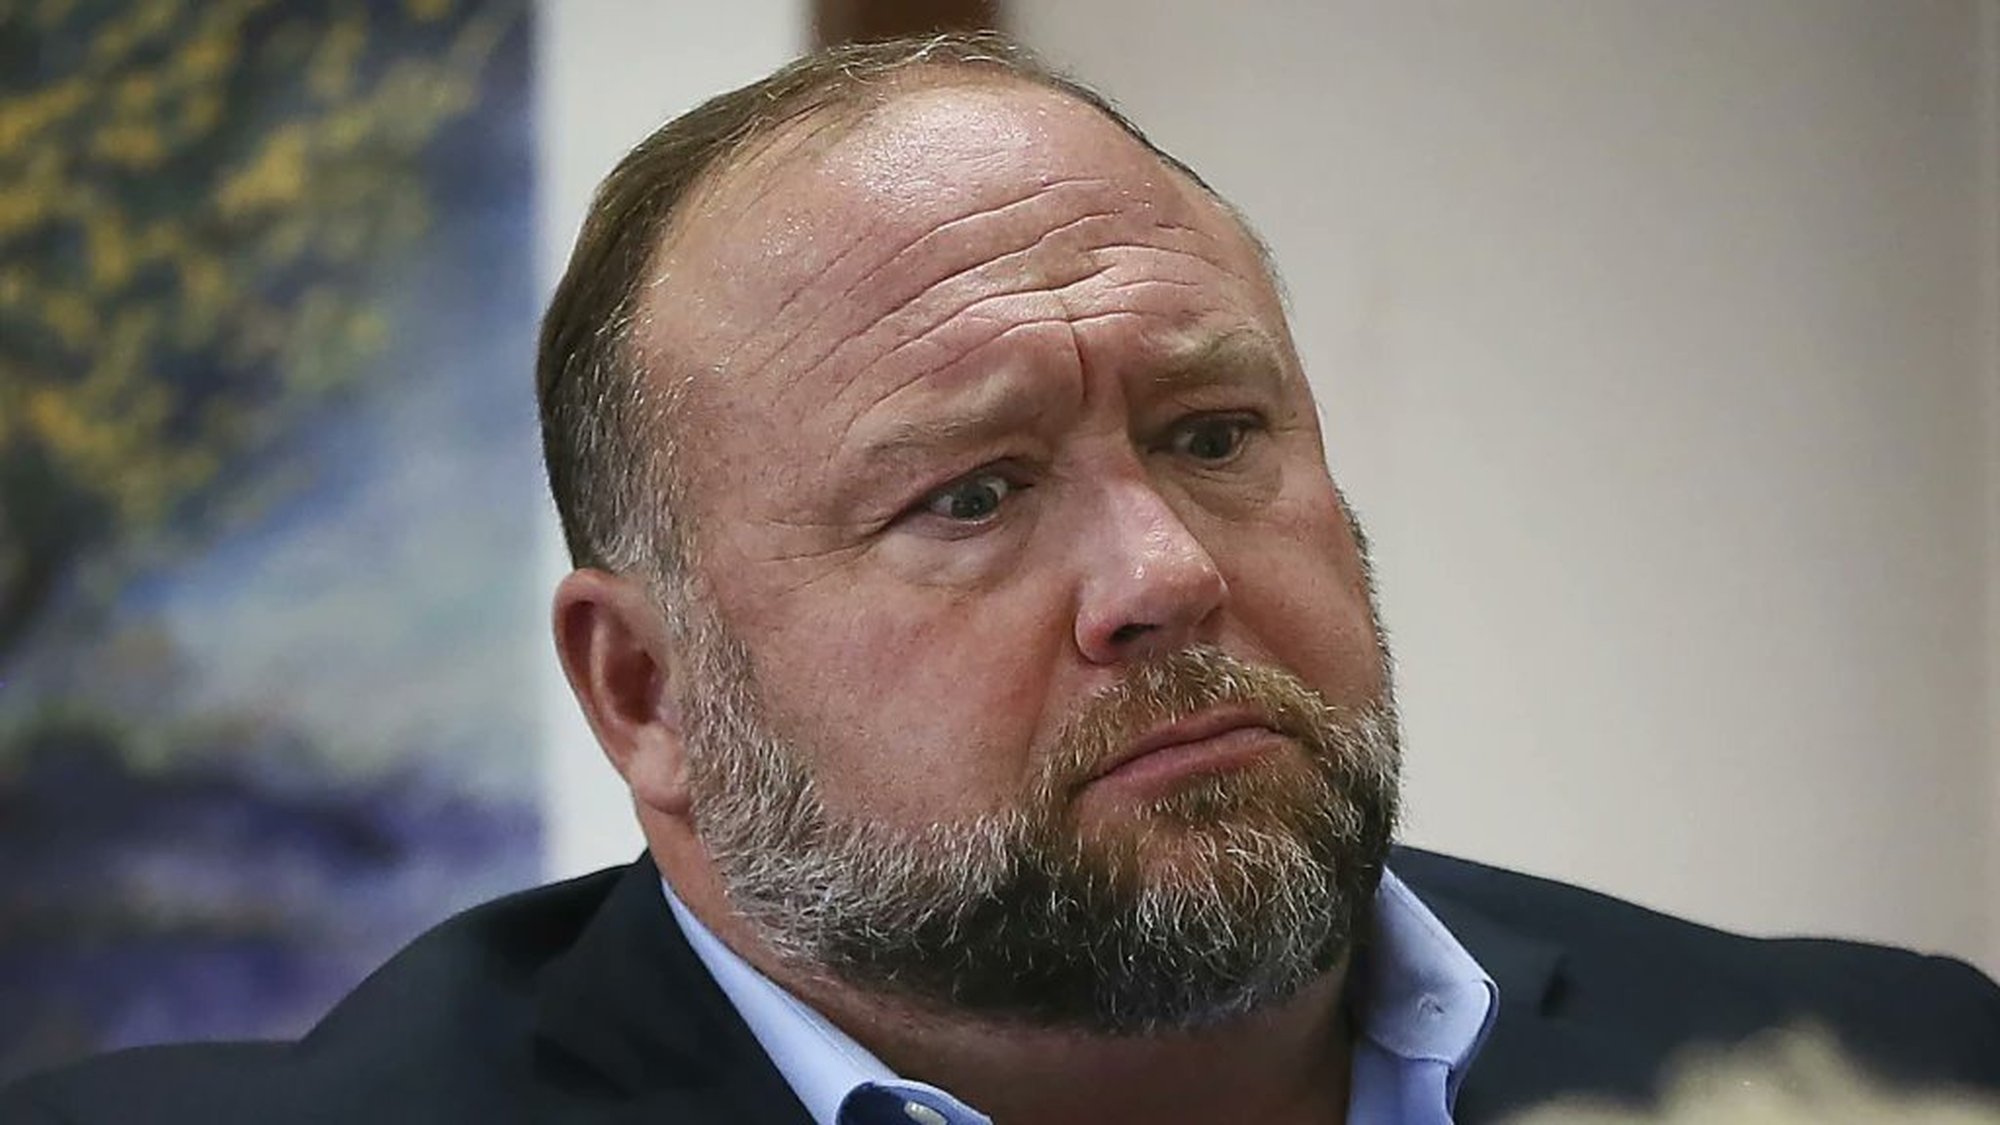 Donald Trump loyalist, Alex Jones ordered to pay US$49 million in punitive damages